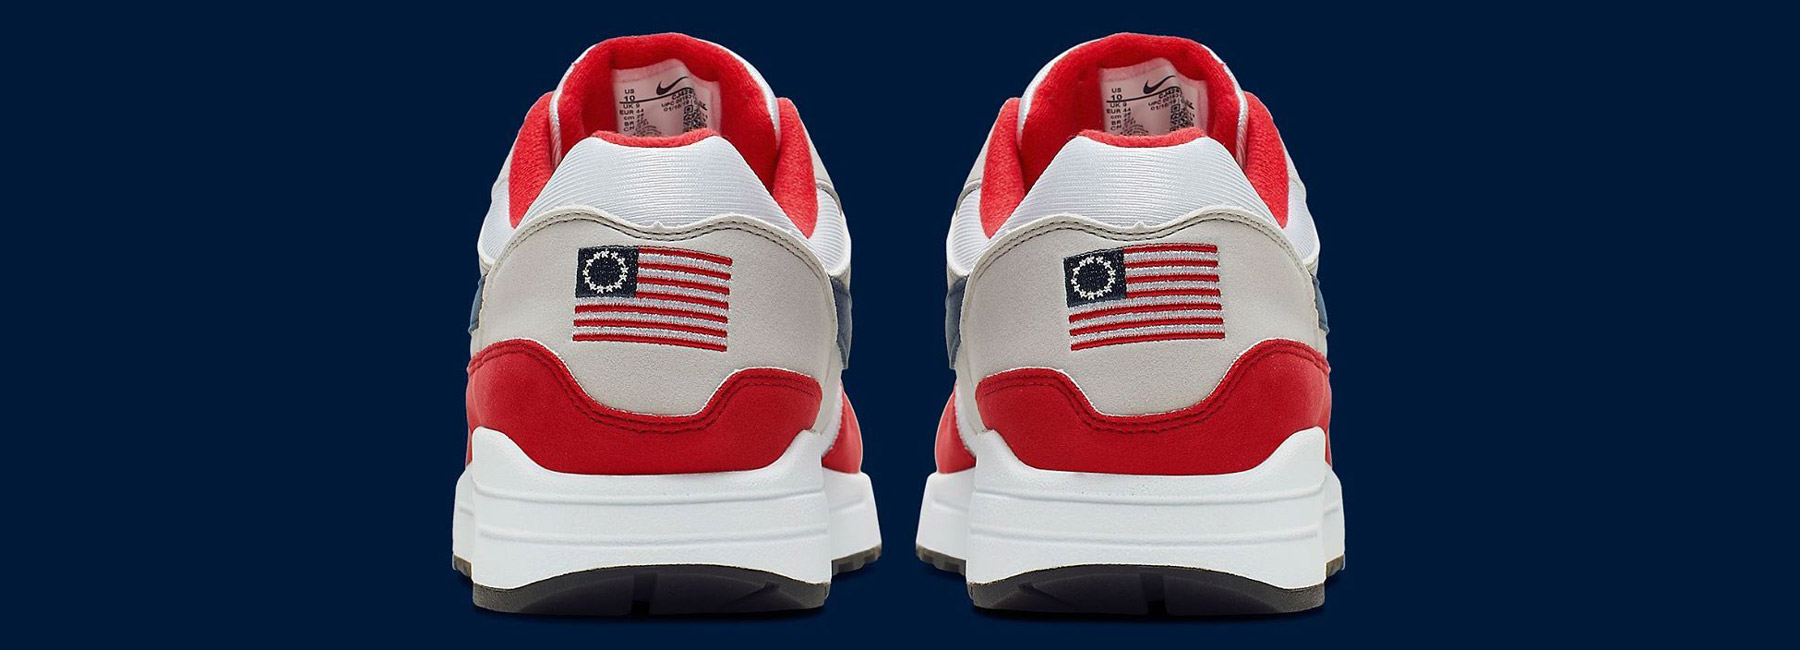 betsy ross flag shoes for sale